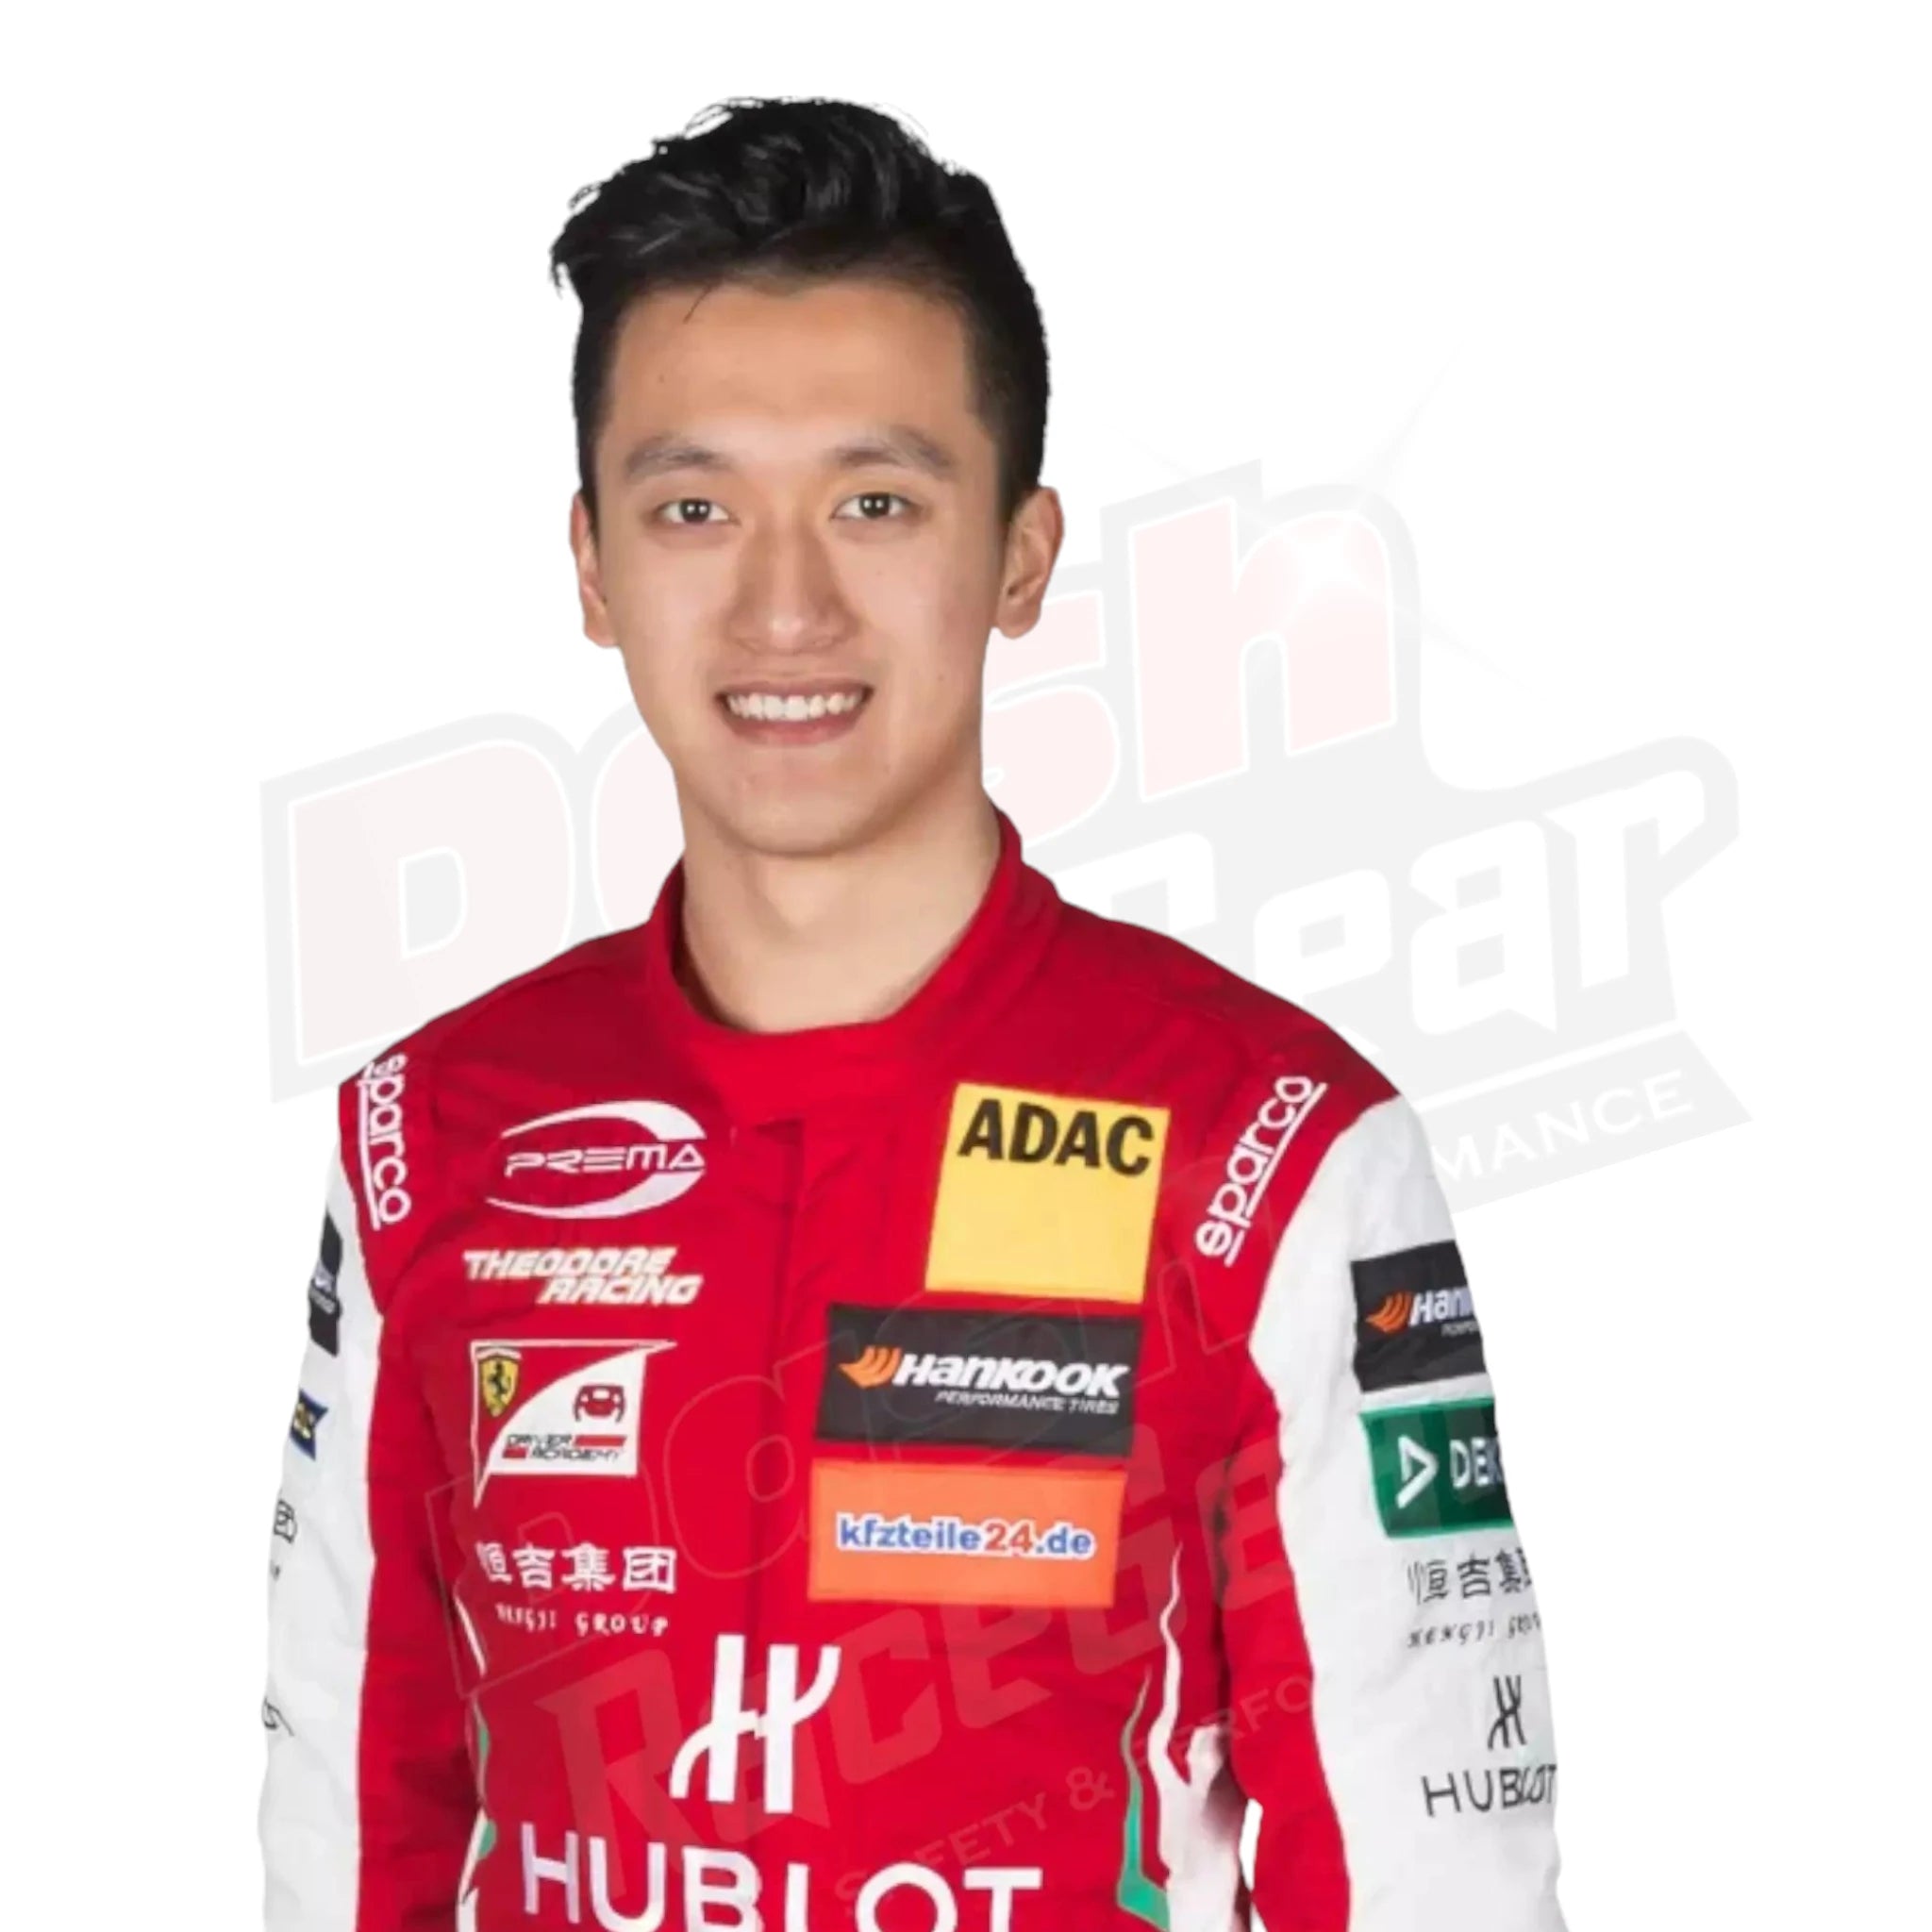 2018 Zhou Guanyu Embroidered F3 Race Suit